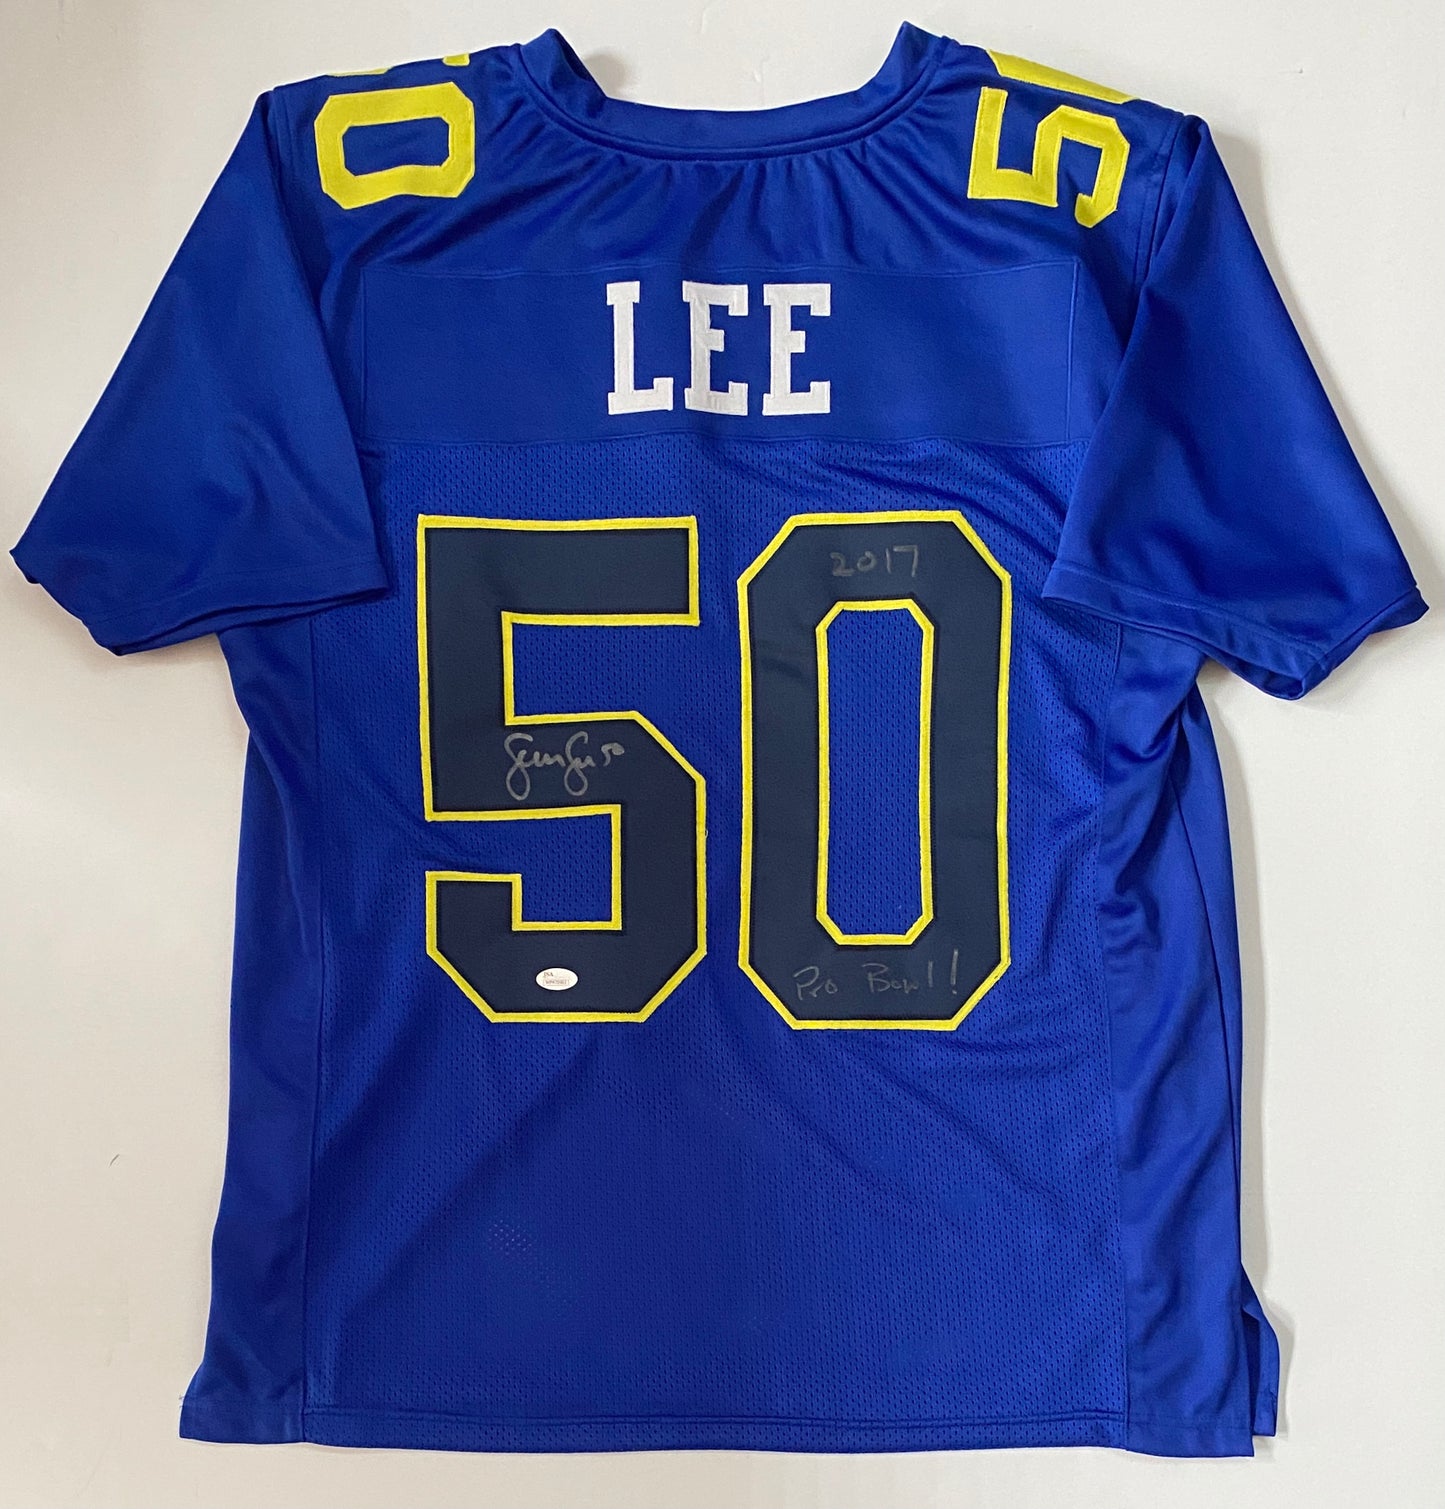 Sean Lee Signed NFC Jersey Inscribed “2017” “Pro Bowl!”